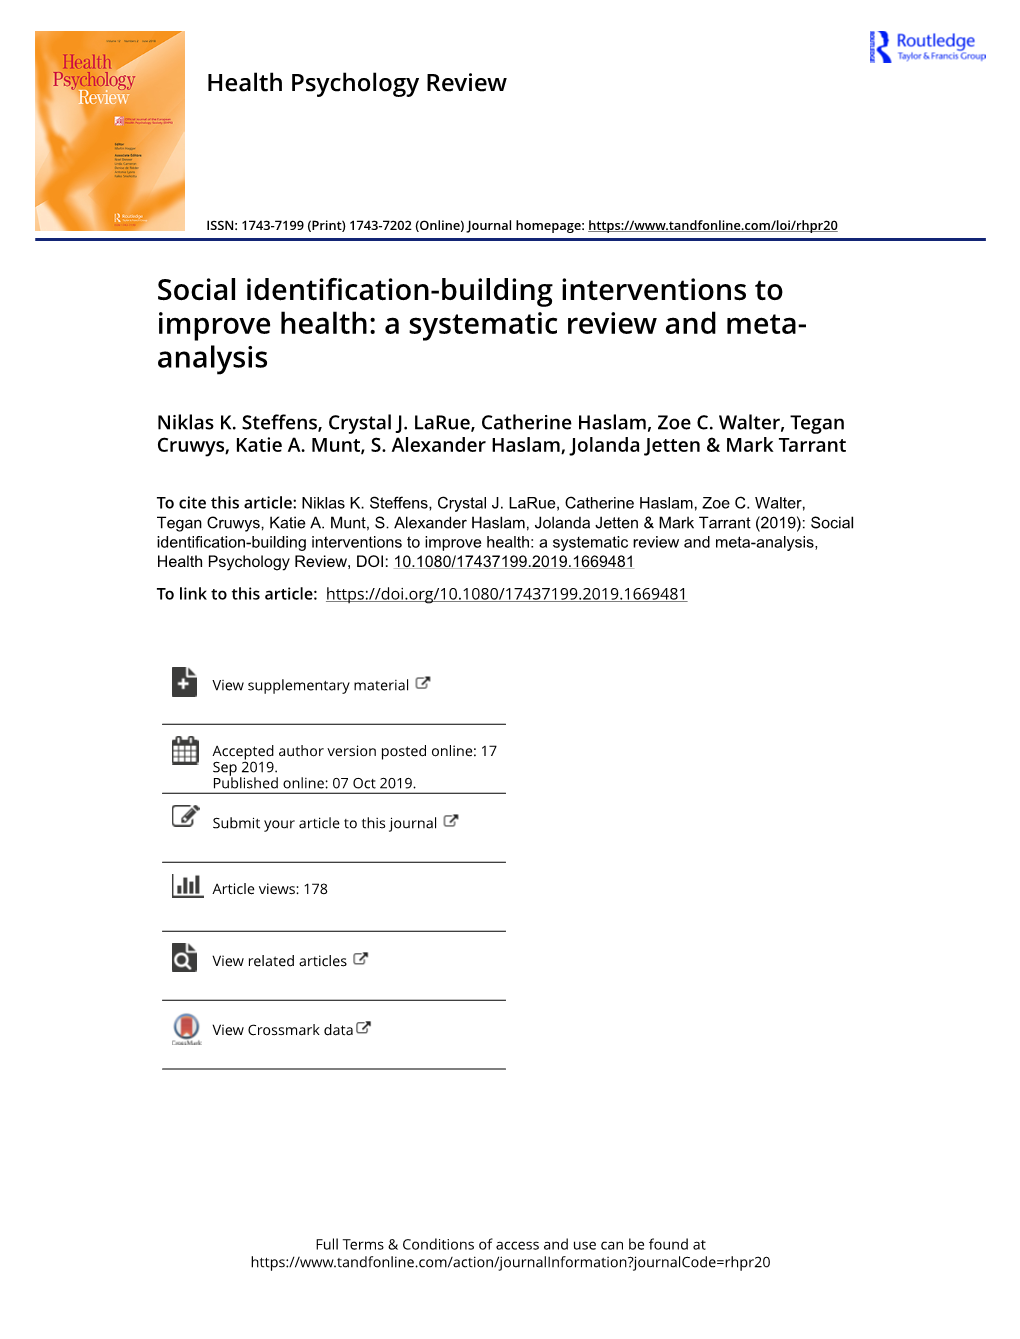 Social Identification-Building Interventions to Improve Health: a Systematic Review and Meta- Analysis